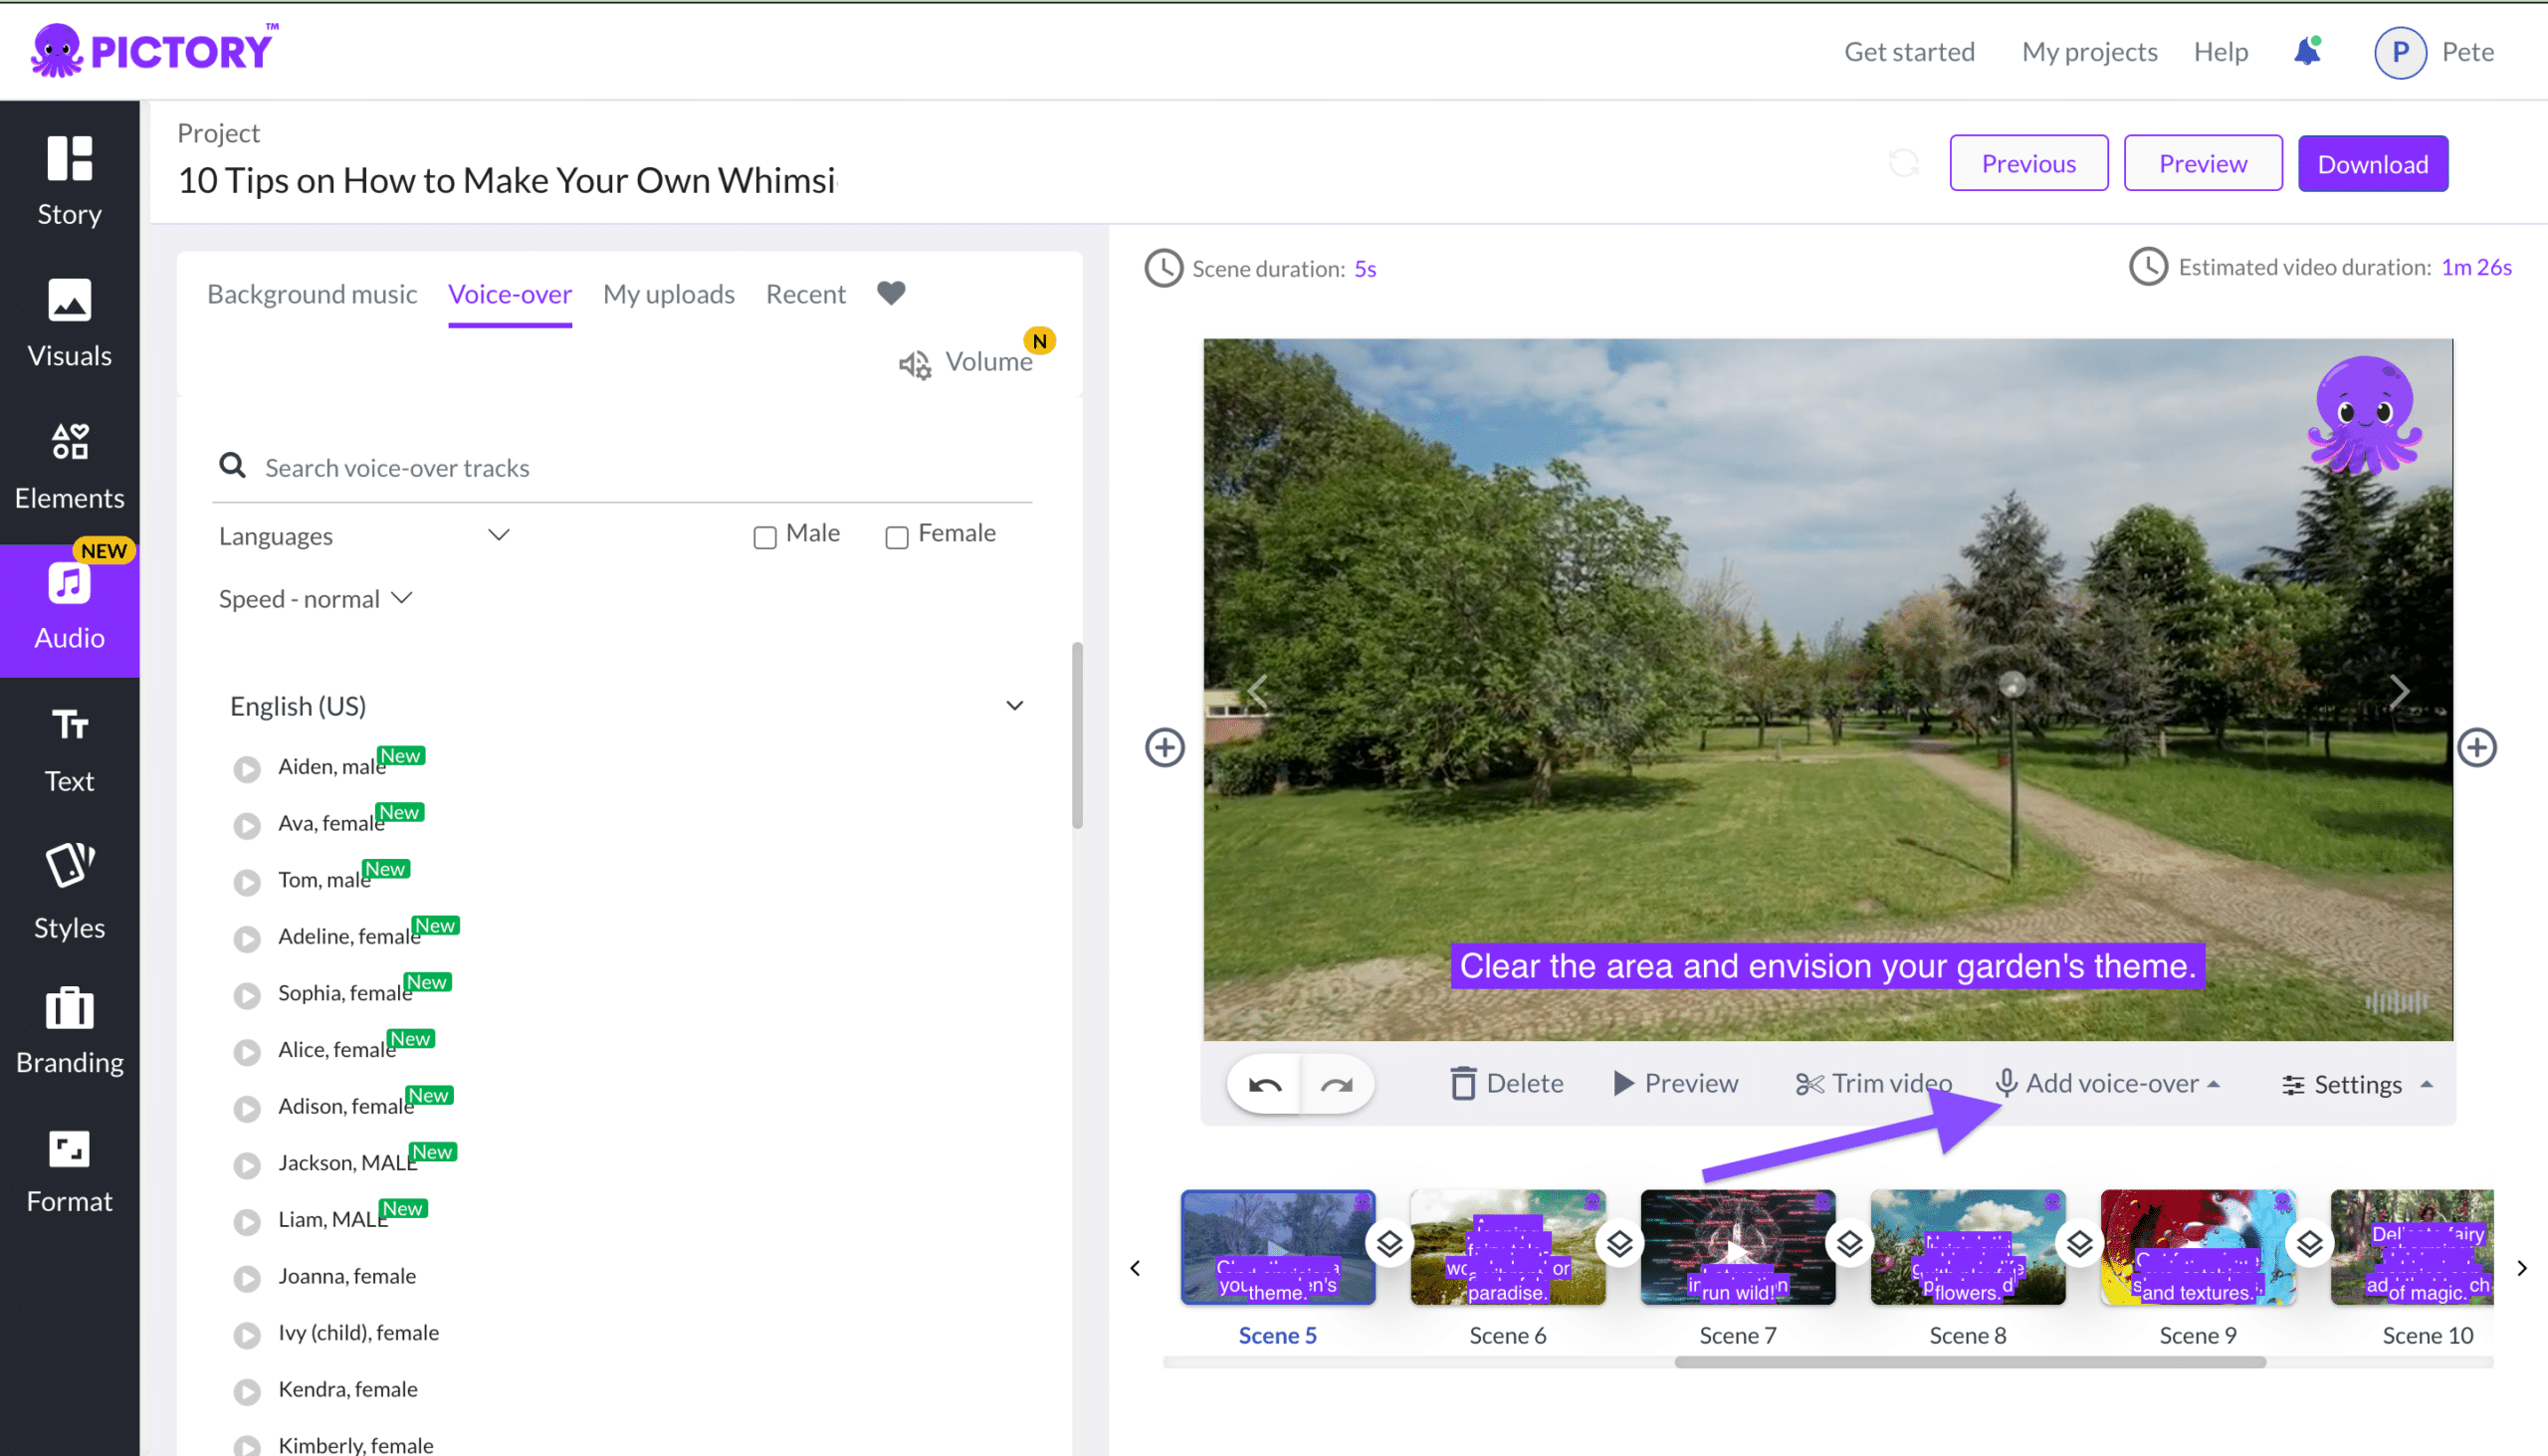 When creating your video, Pictory allows you to add your completed voiceover content to your video timeline.